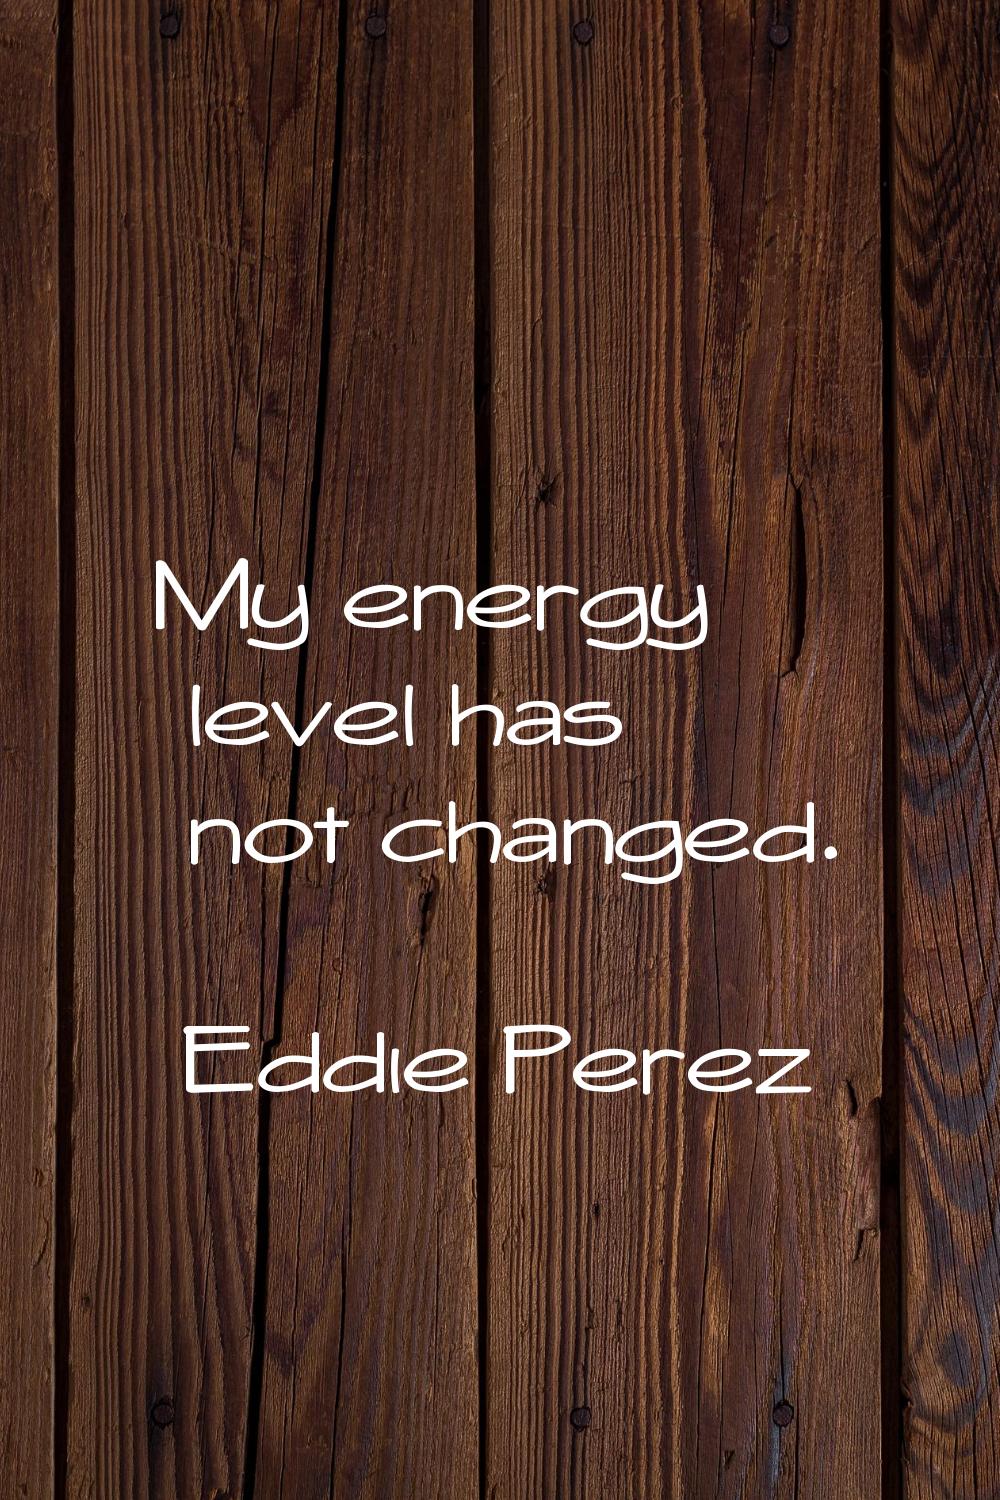 My energy level has not changed.